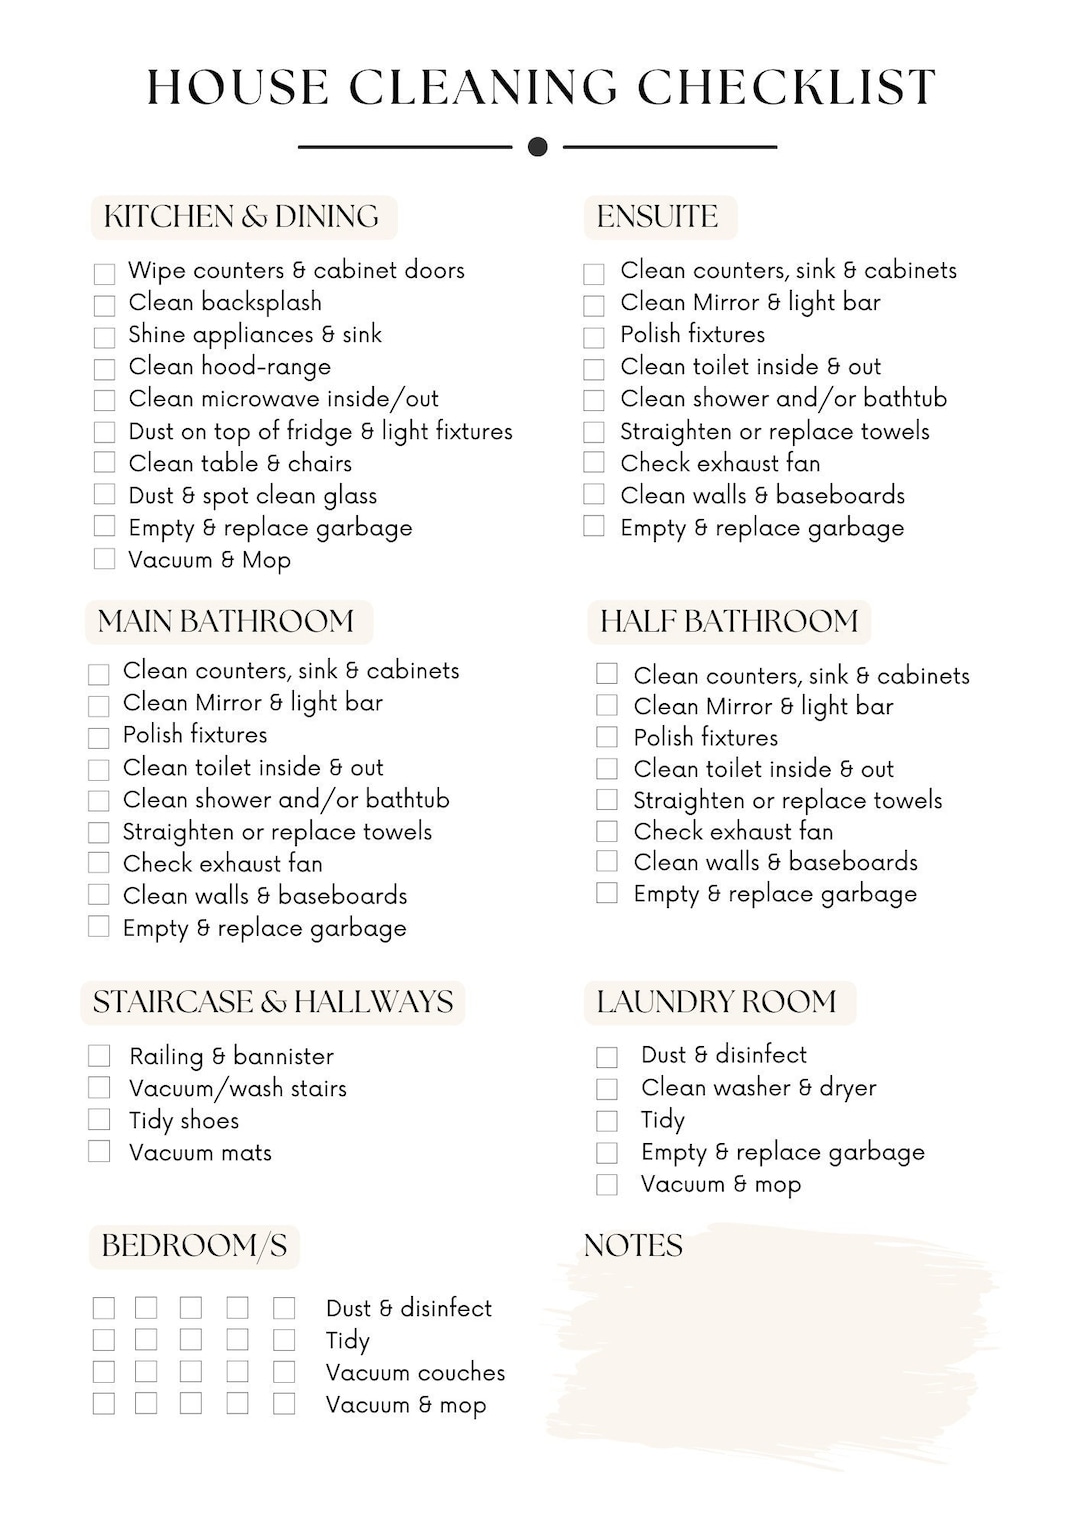 Cleaning Checklist Digital Printable House Cleaning - Etsy